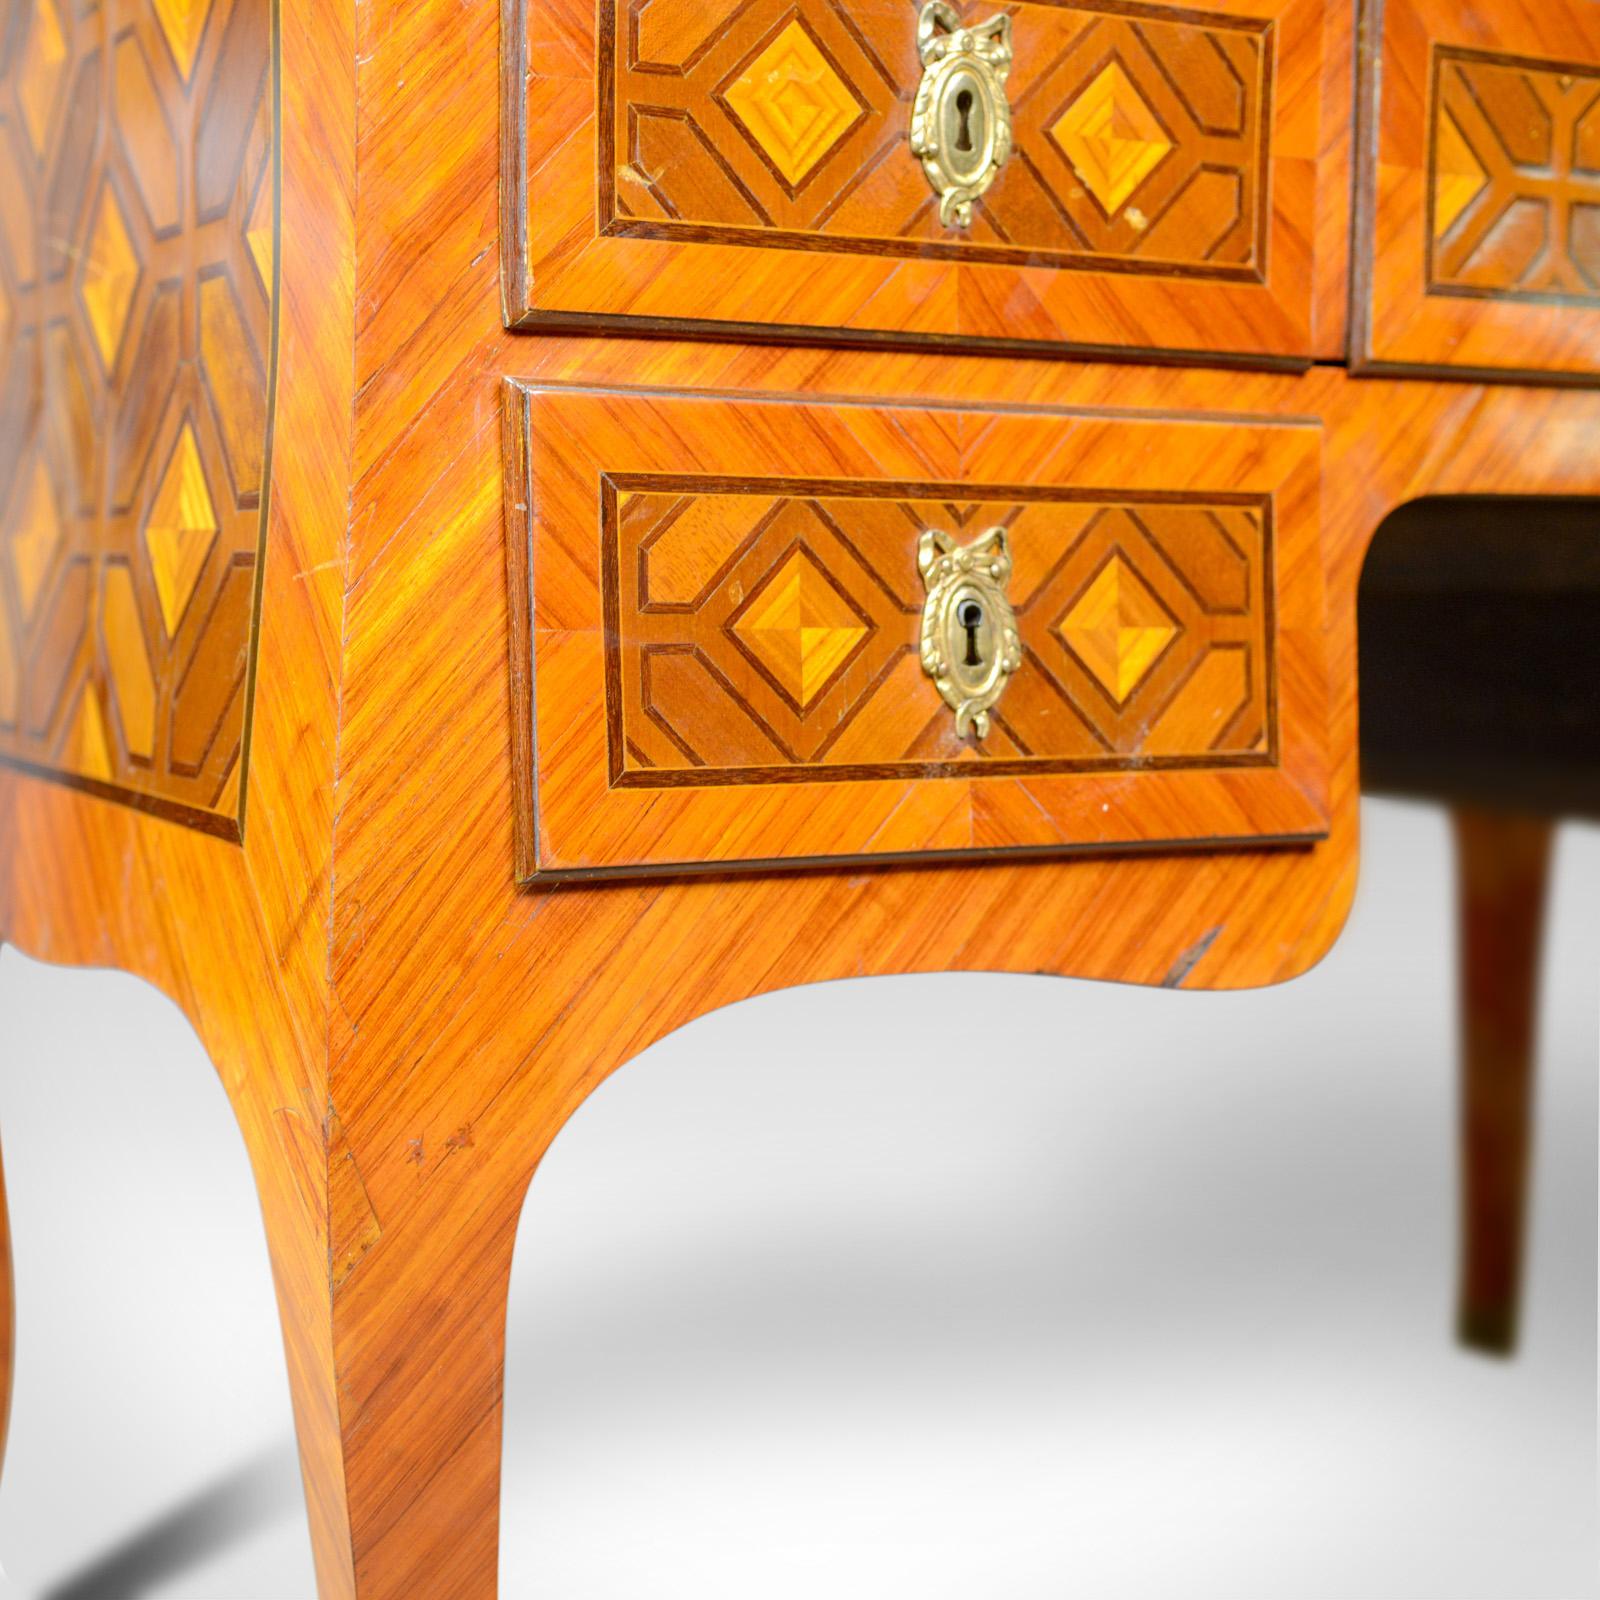 Antique Bureau, French, Marble Top, Kingwood, Marquetry Desk, circa 1900 For Sale 5